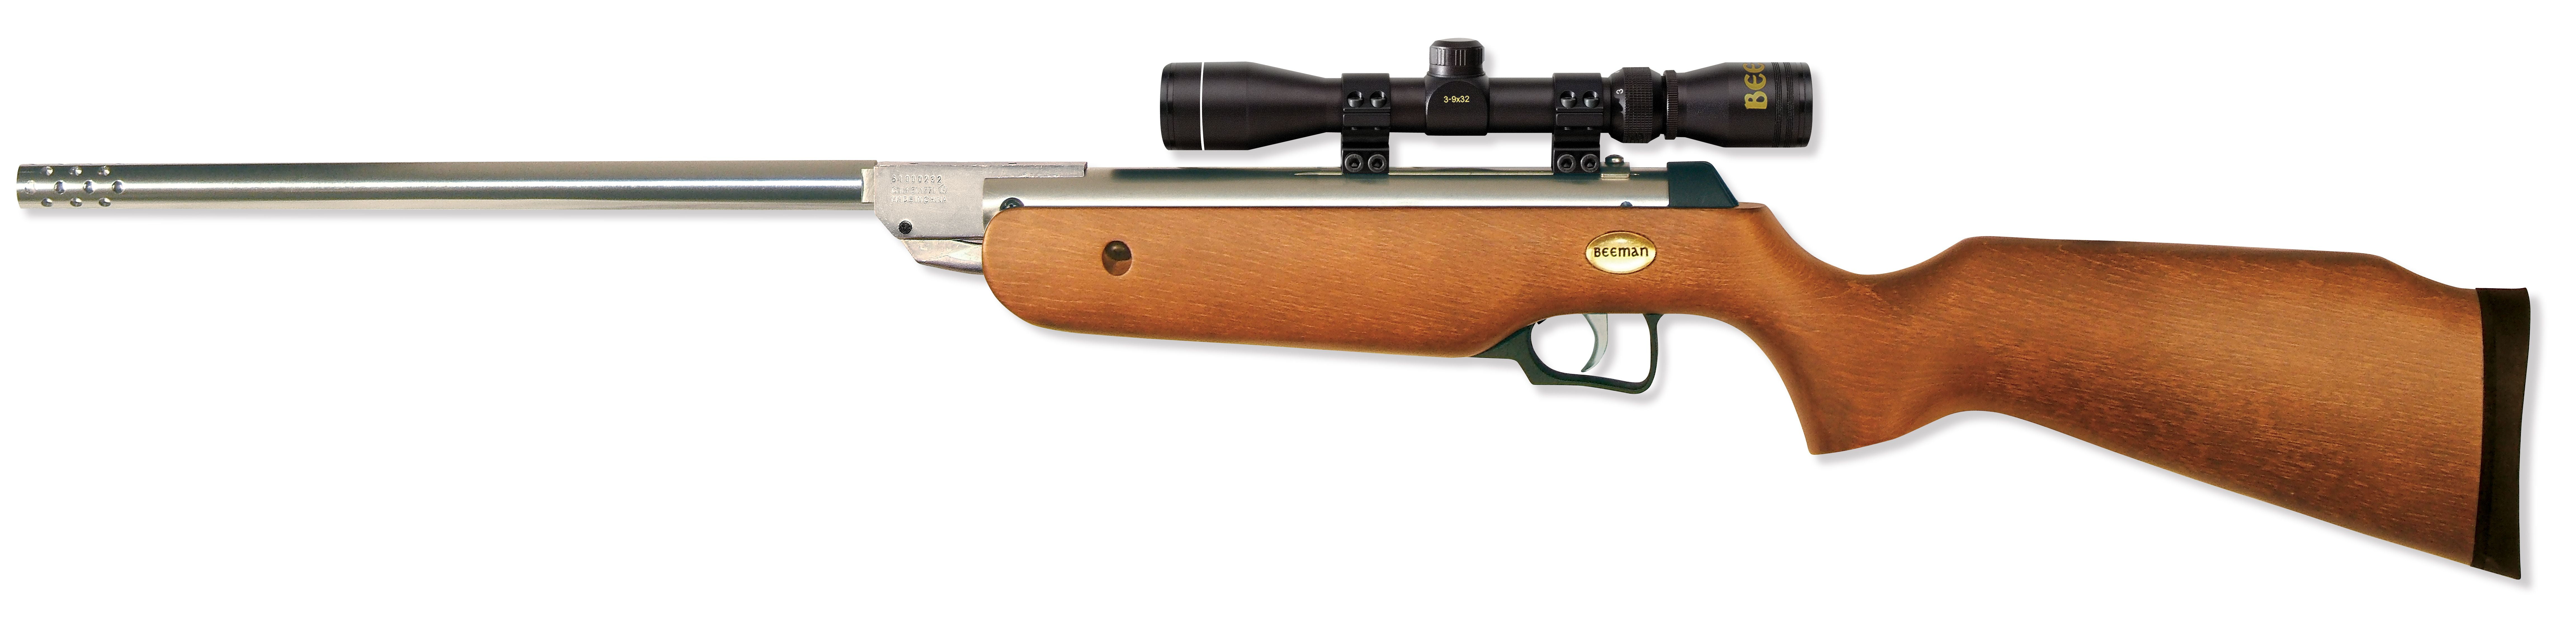  Beeman  177 Caliber M P 2 Air  Rifle  Combo with Ported 